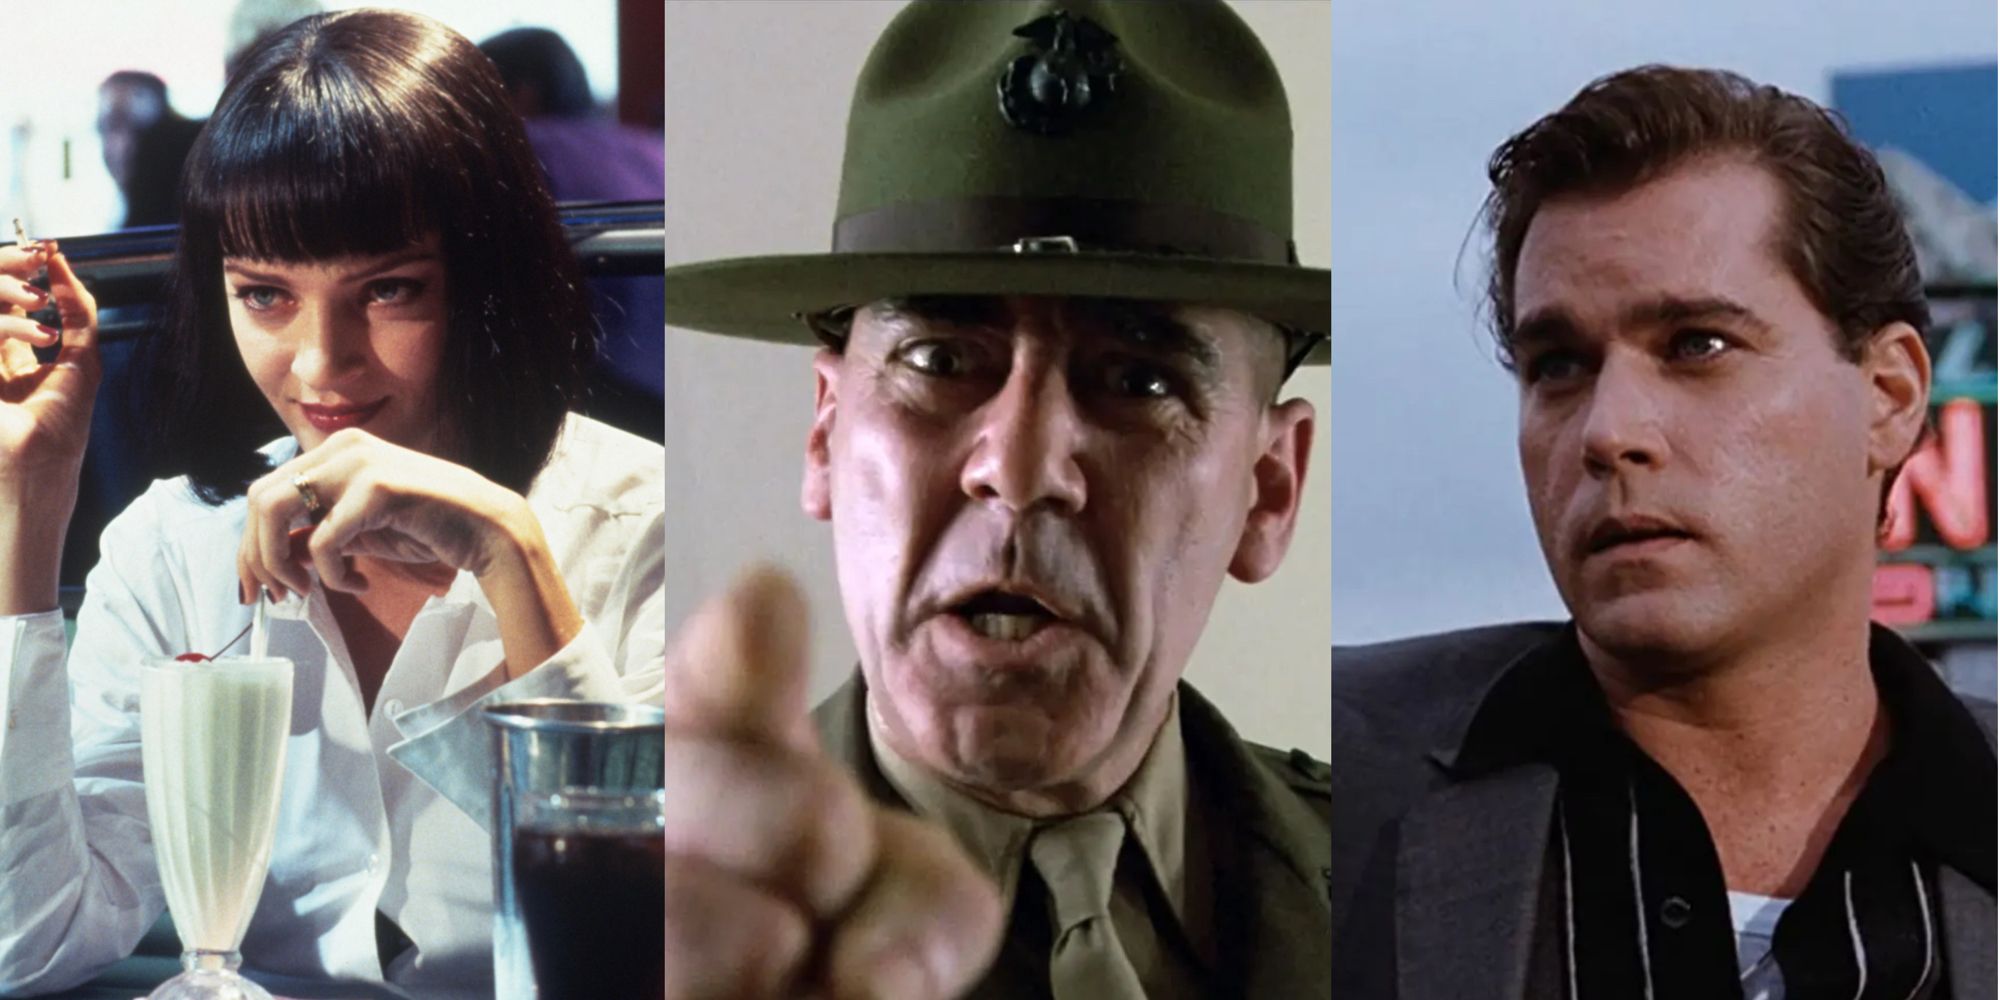 Pulp Fiction, Full Metal Jacket and Goodfellas